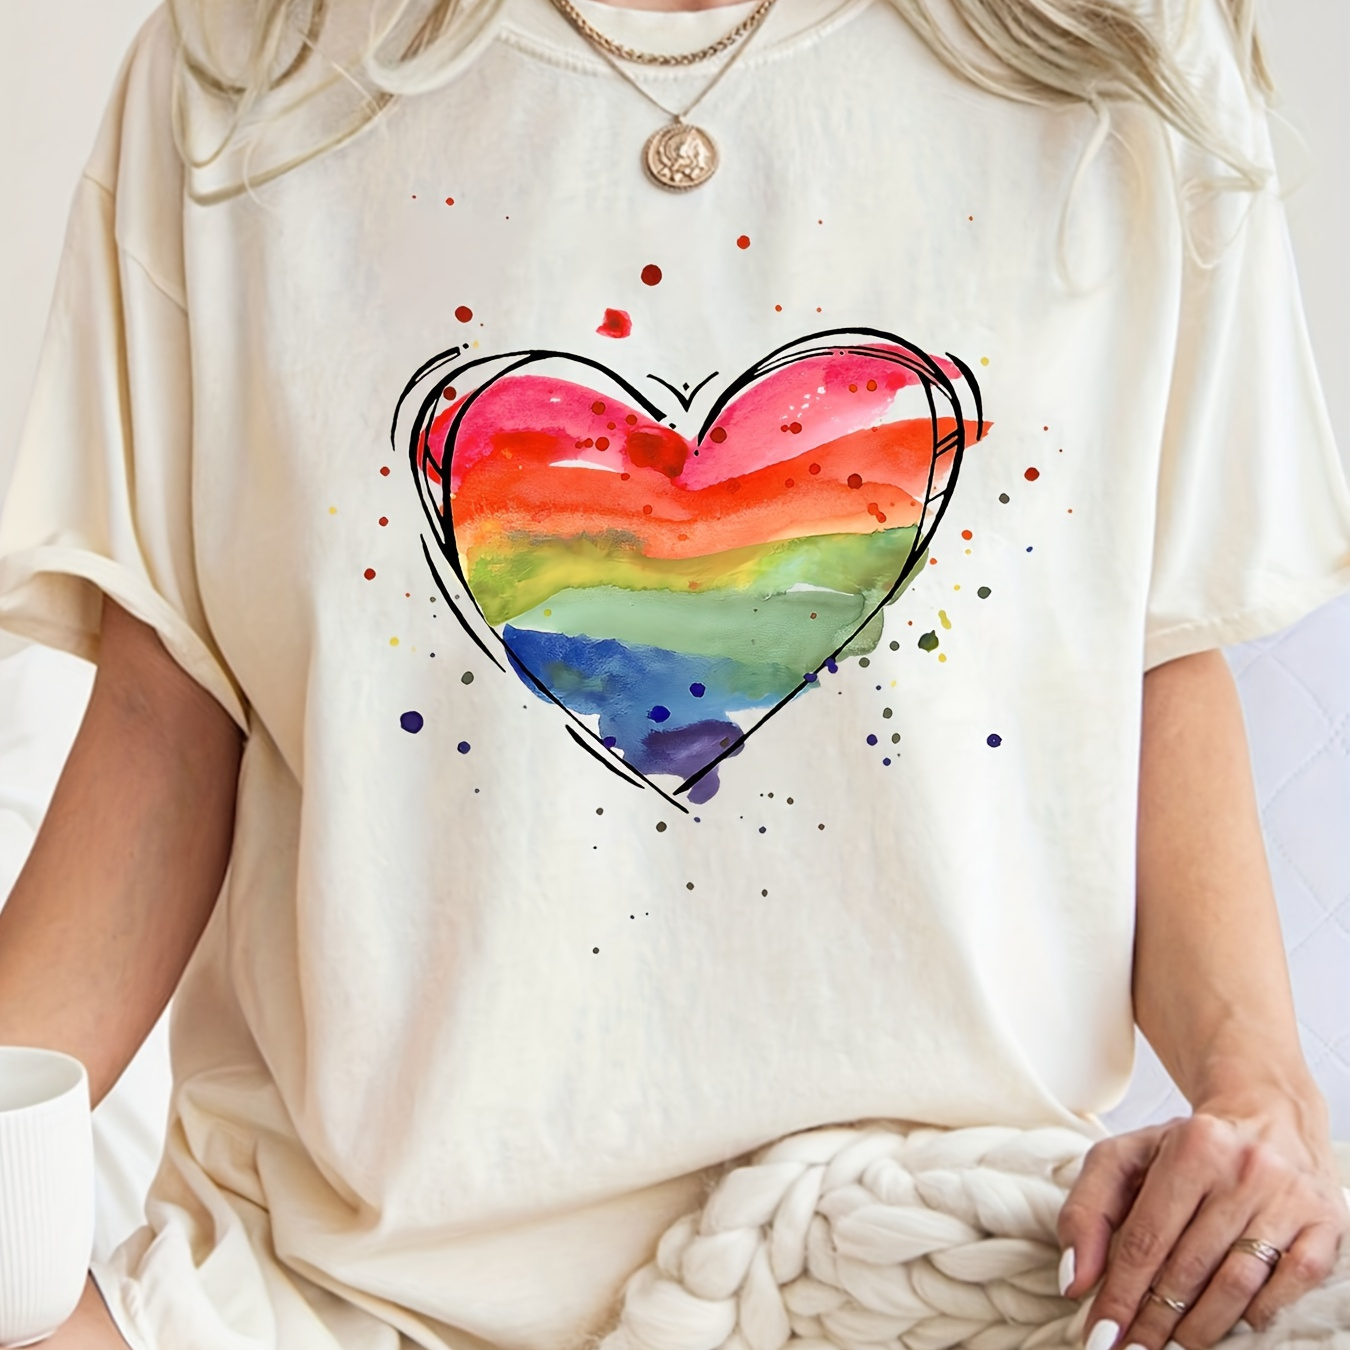 

Heart Print T-shirt, Casual Short Sleeve Crew Neck Top For Spring & Summer, Women's Clothing